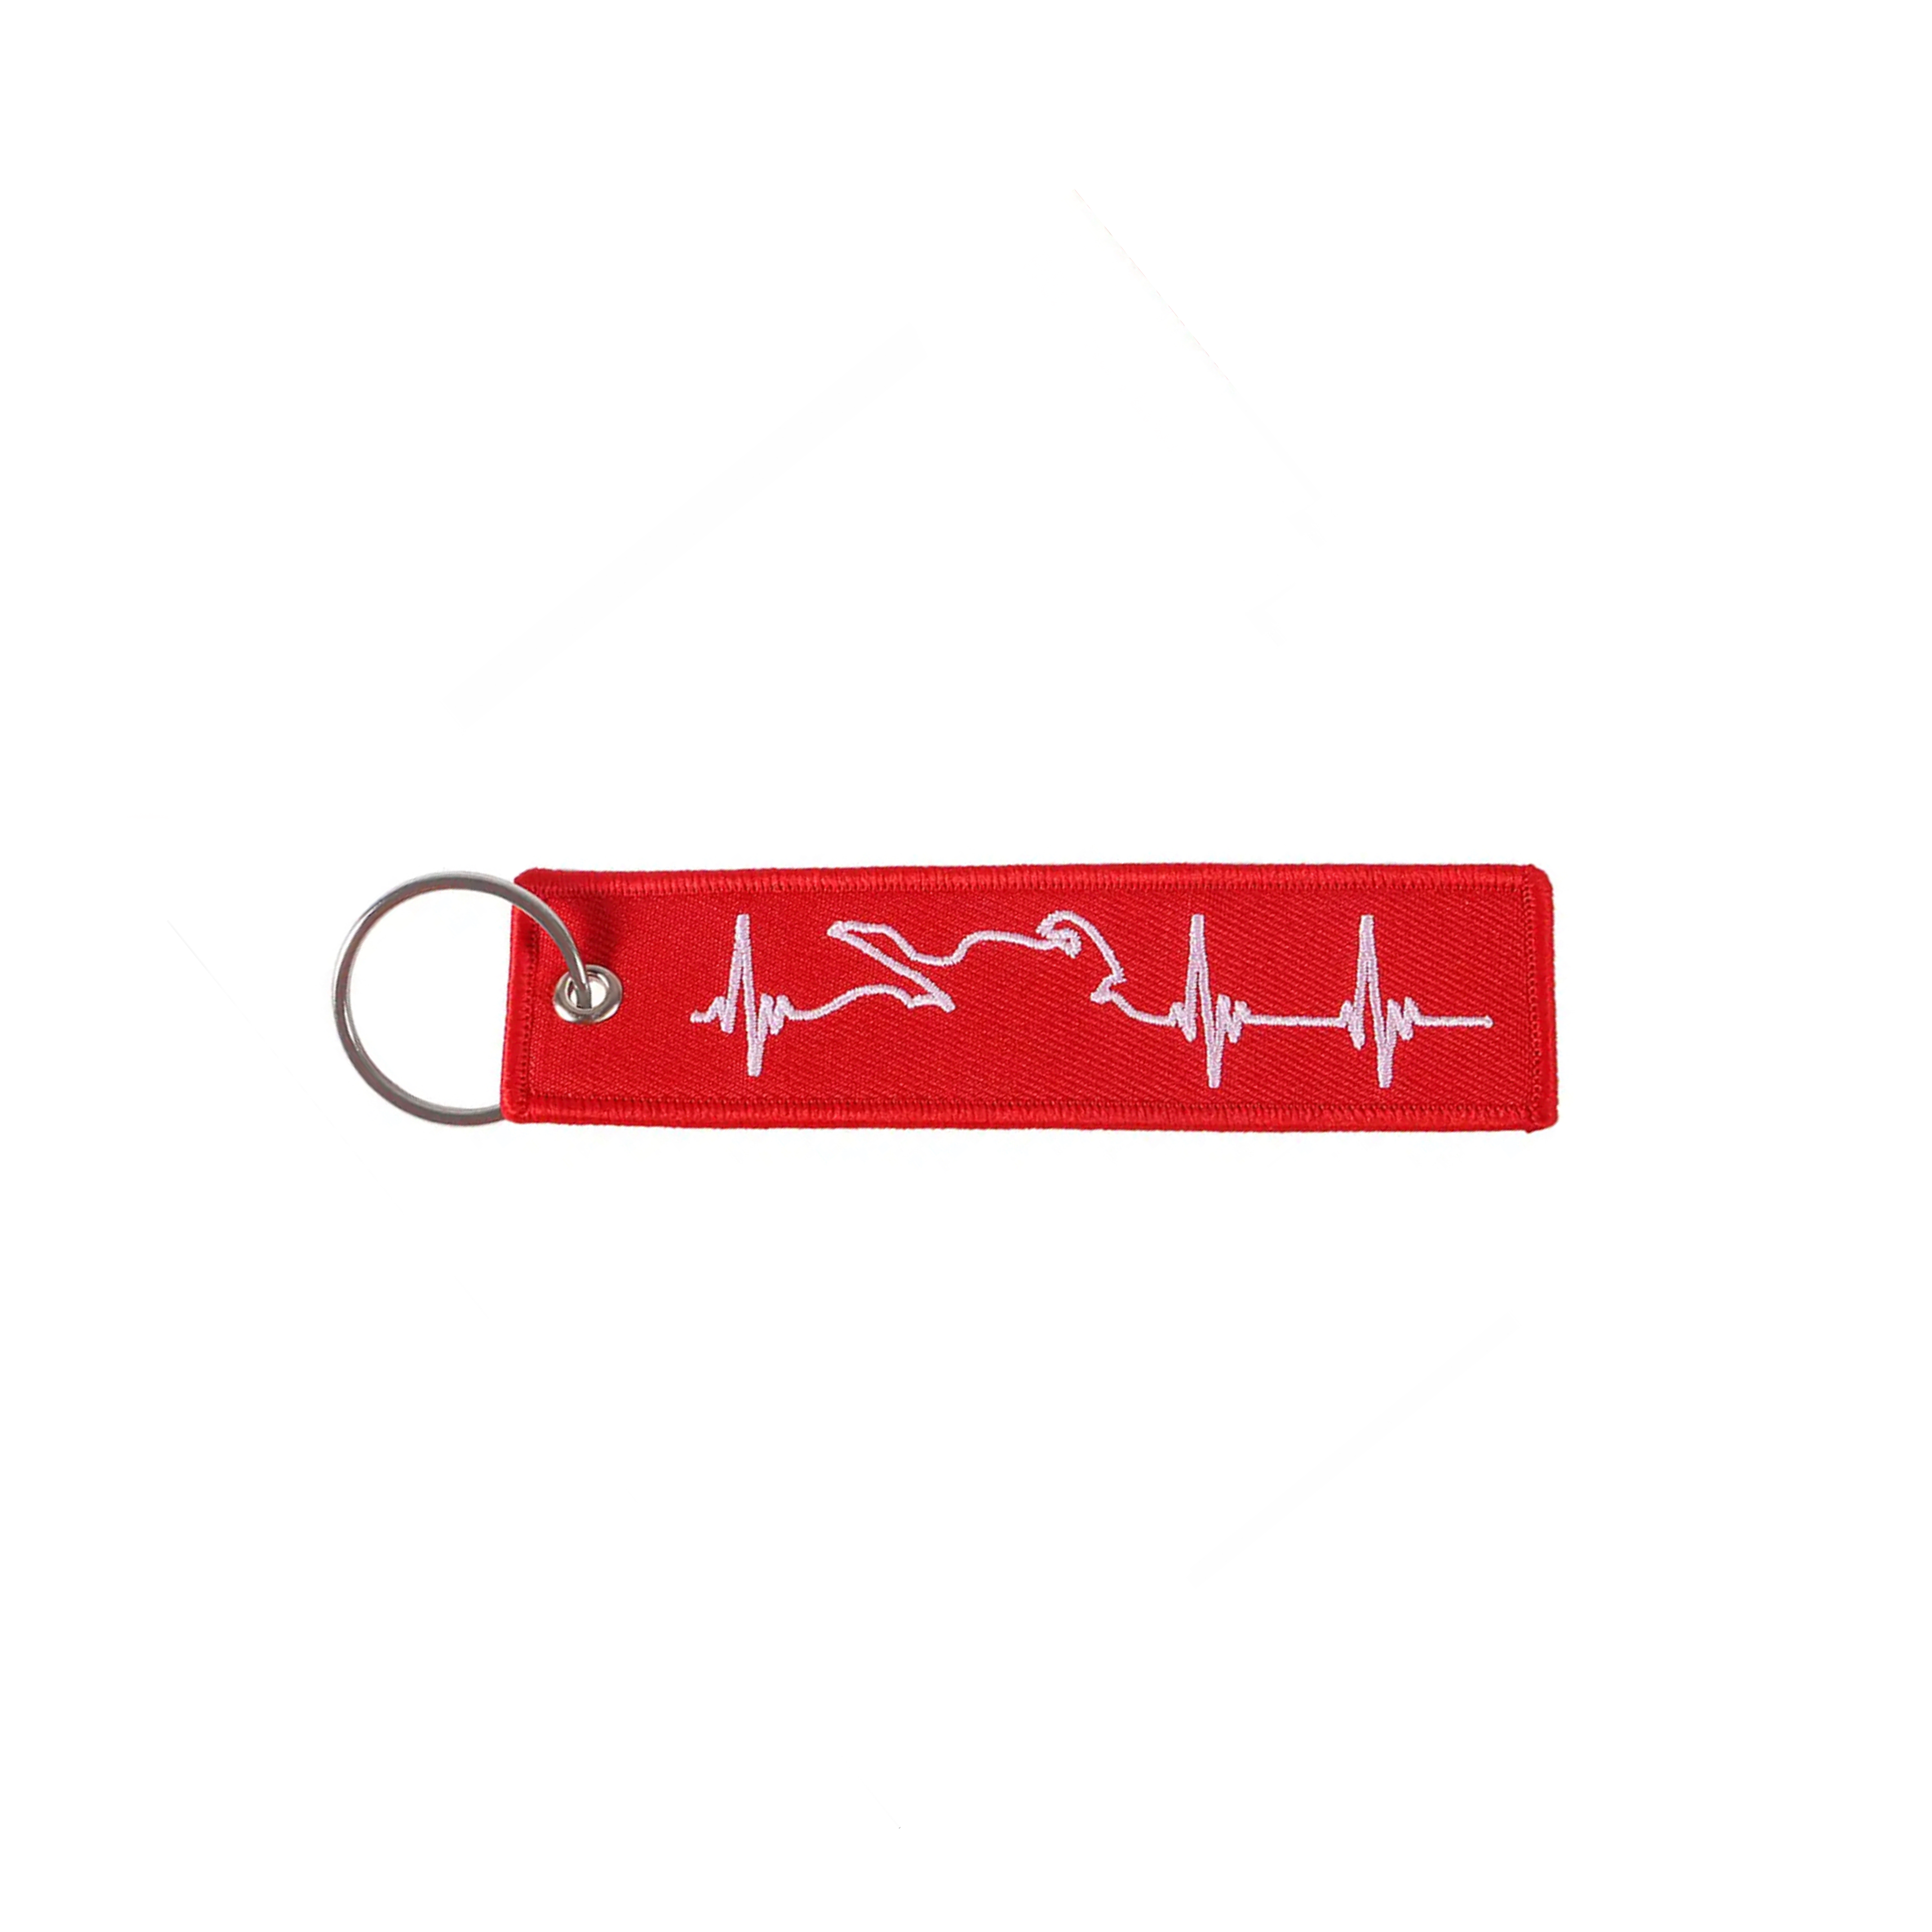 Motorcycle Keychain - Heartbeat Red